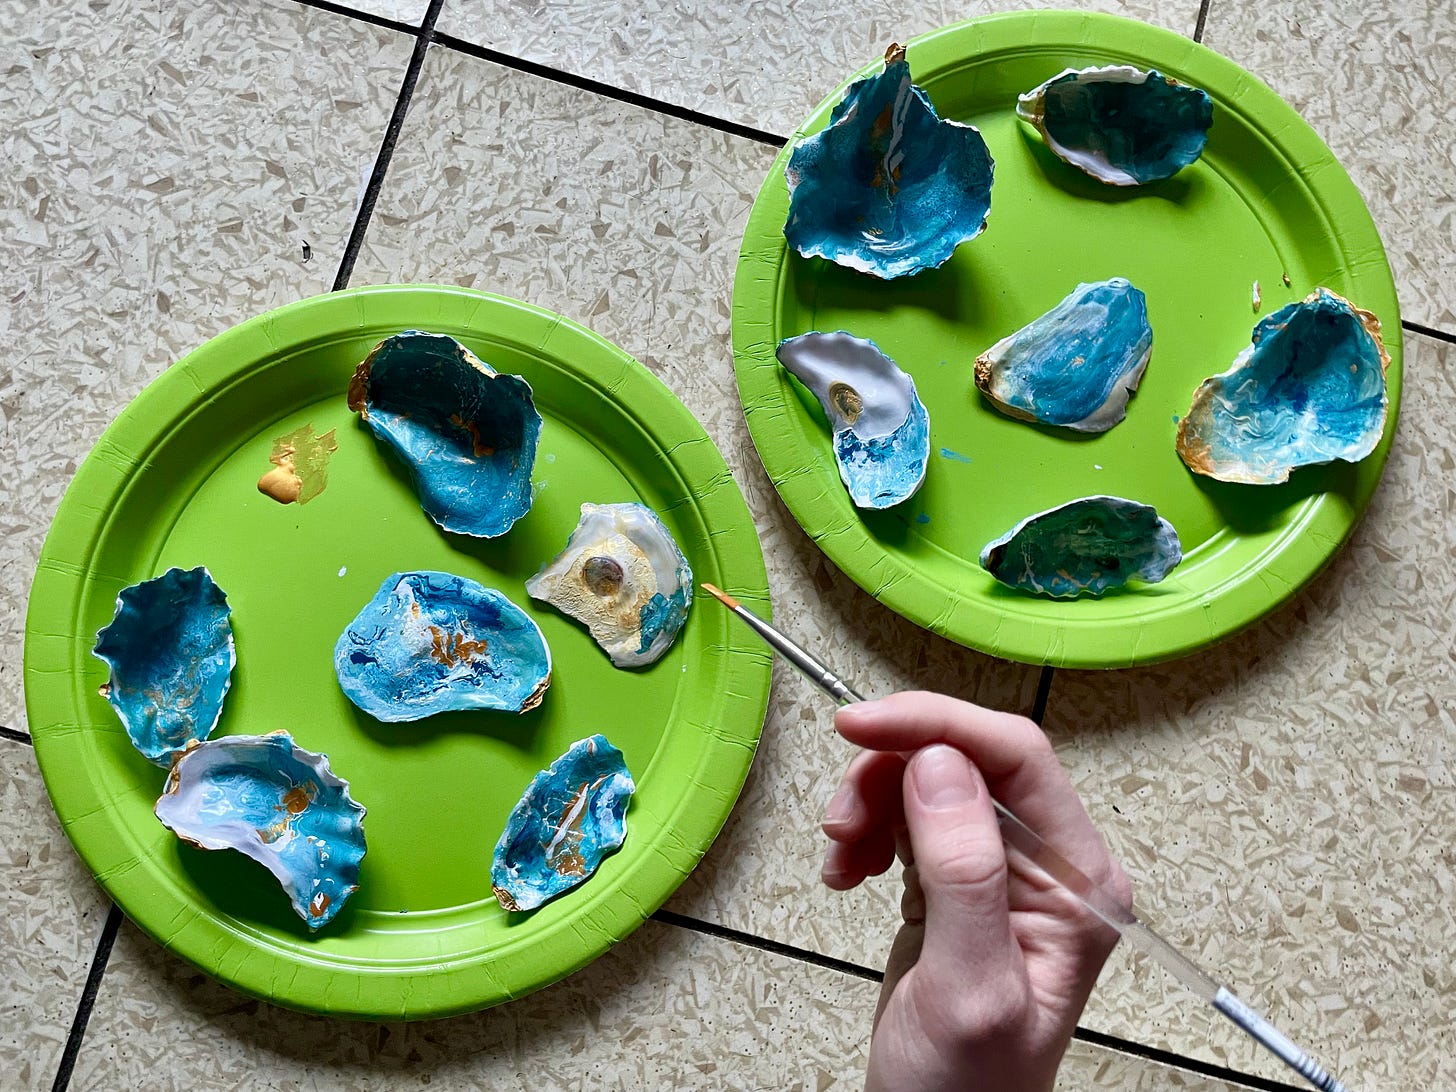 A photograph of two green plates, covered in hand-painted oyster shells. There is a hand holding a paint brush with some gold paint on the tip.